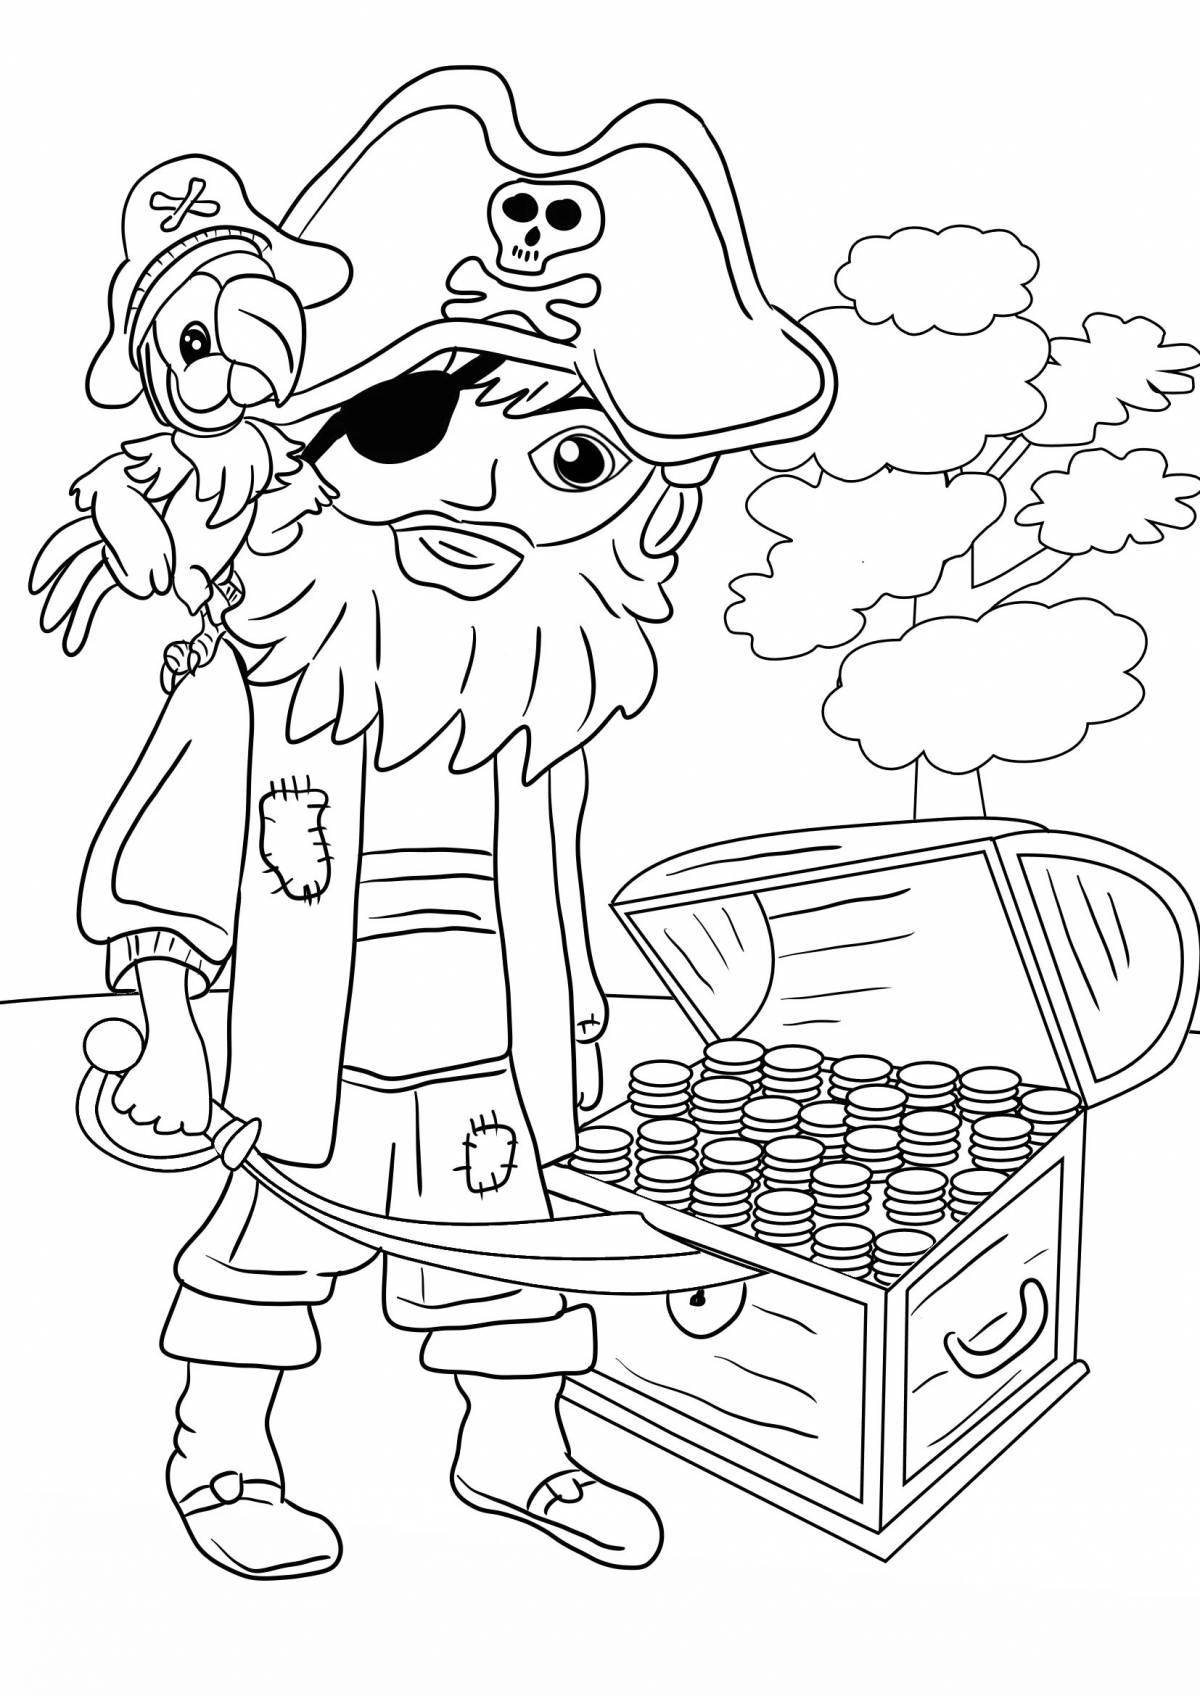 Witty pirate coloring page